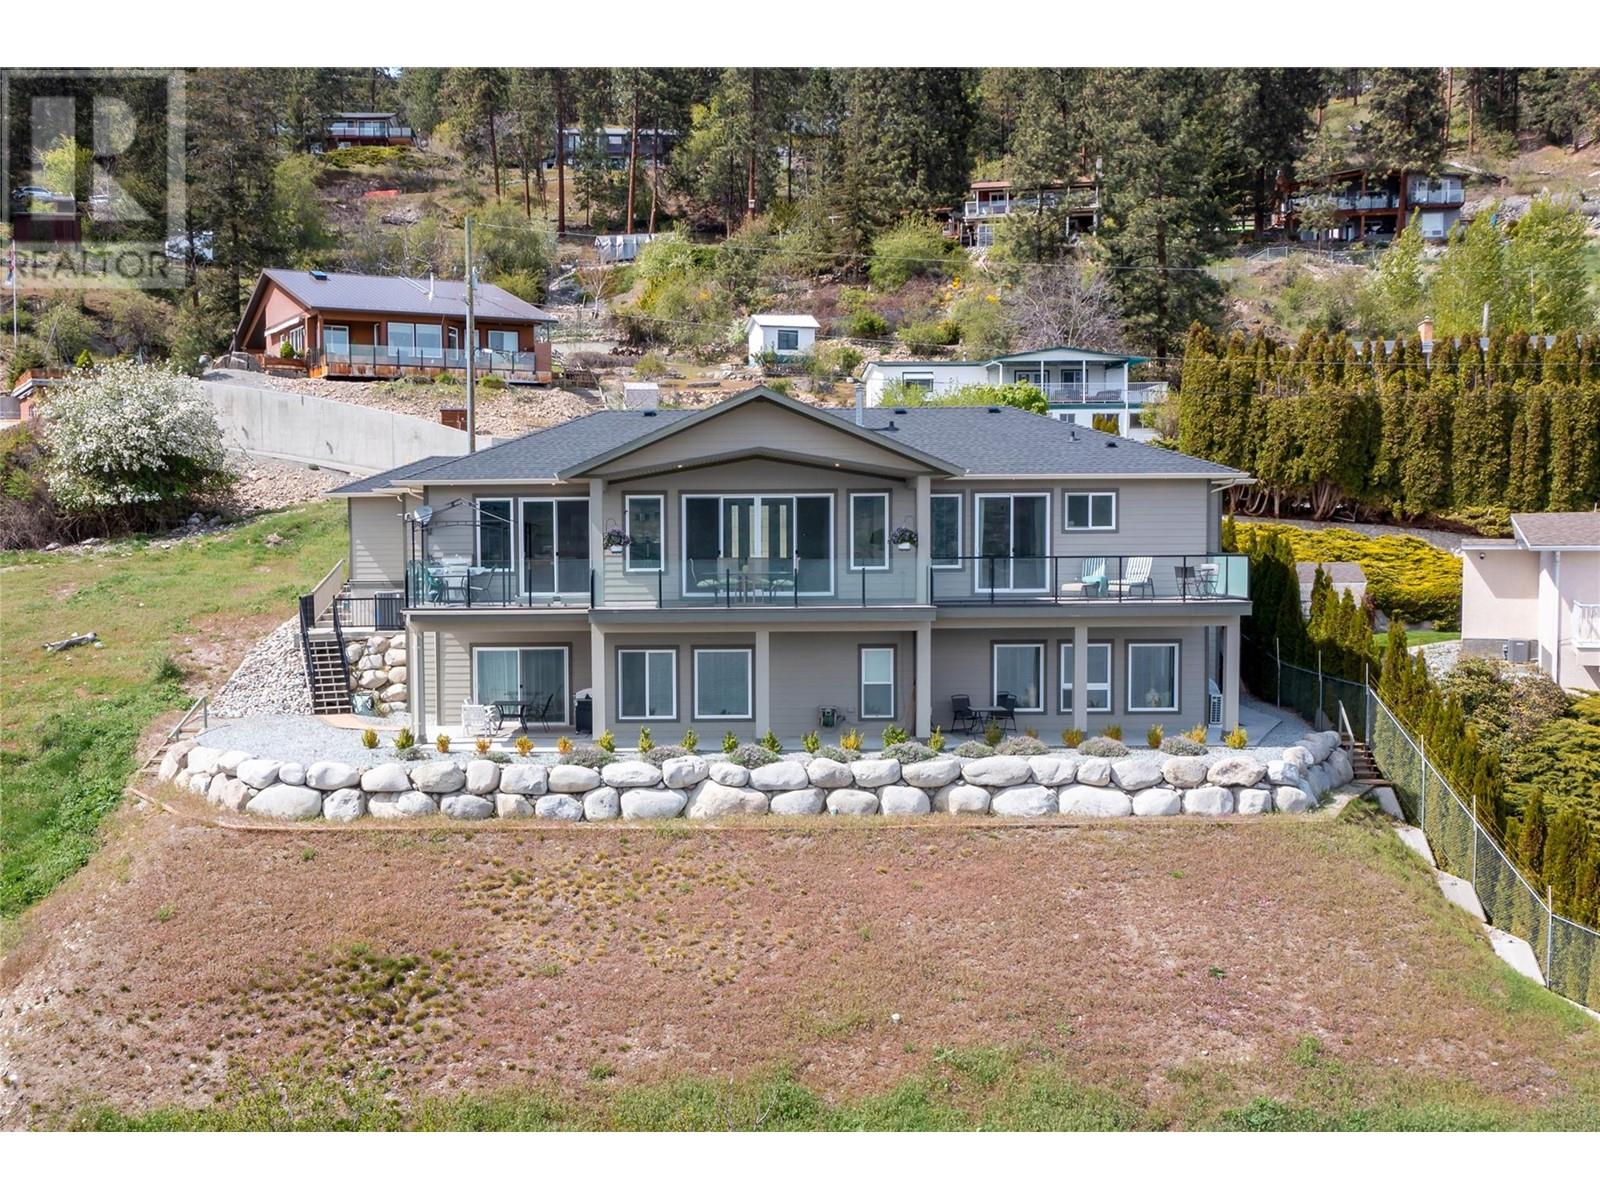  6372 Topham Place, Peachland